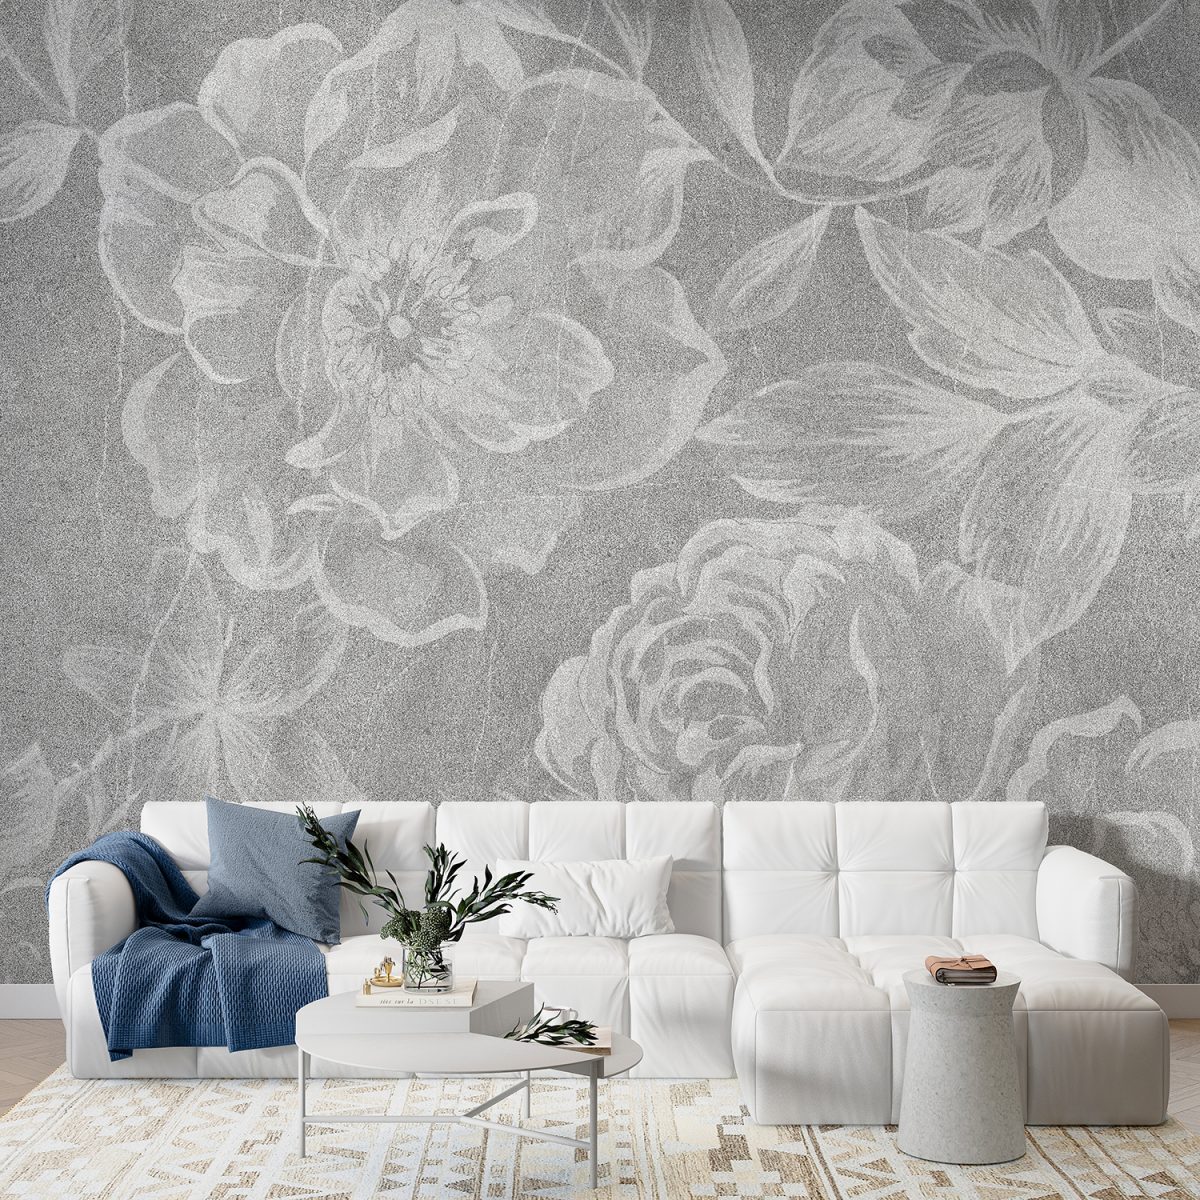 Flowers with old white Wall wallpaper